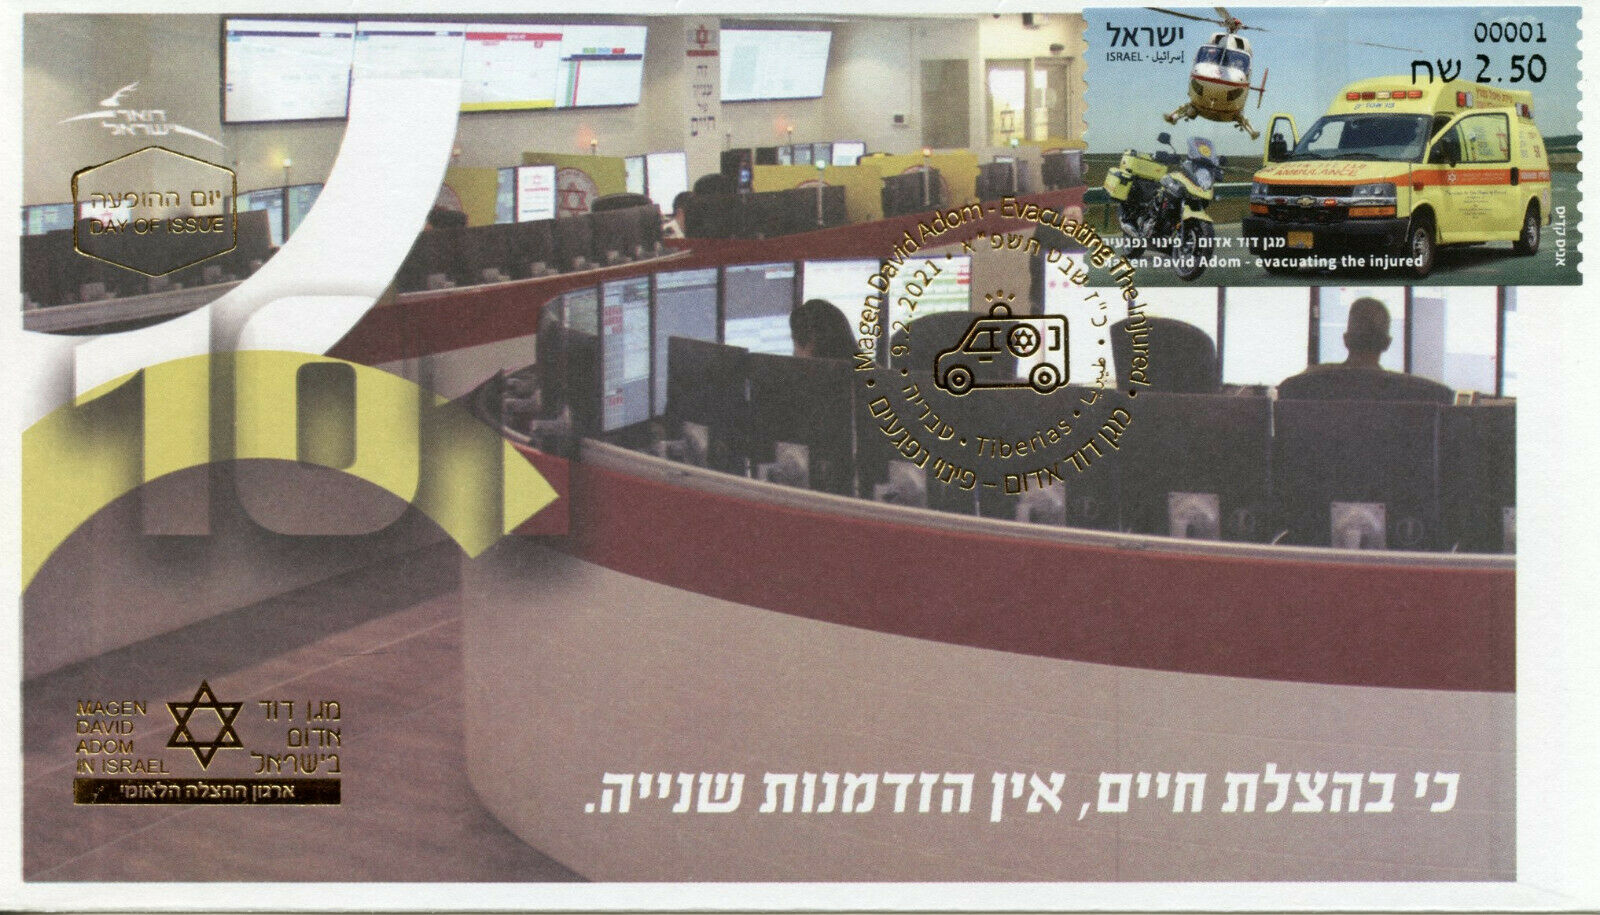 Israel Stamps 2021 FDC Magen David Adom Emergency Helicopters 1v S/A ATM Label